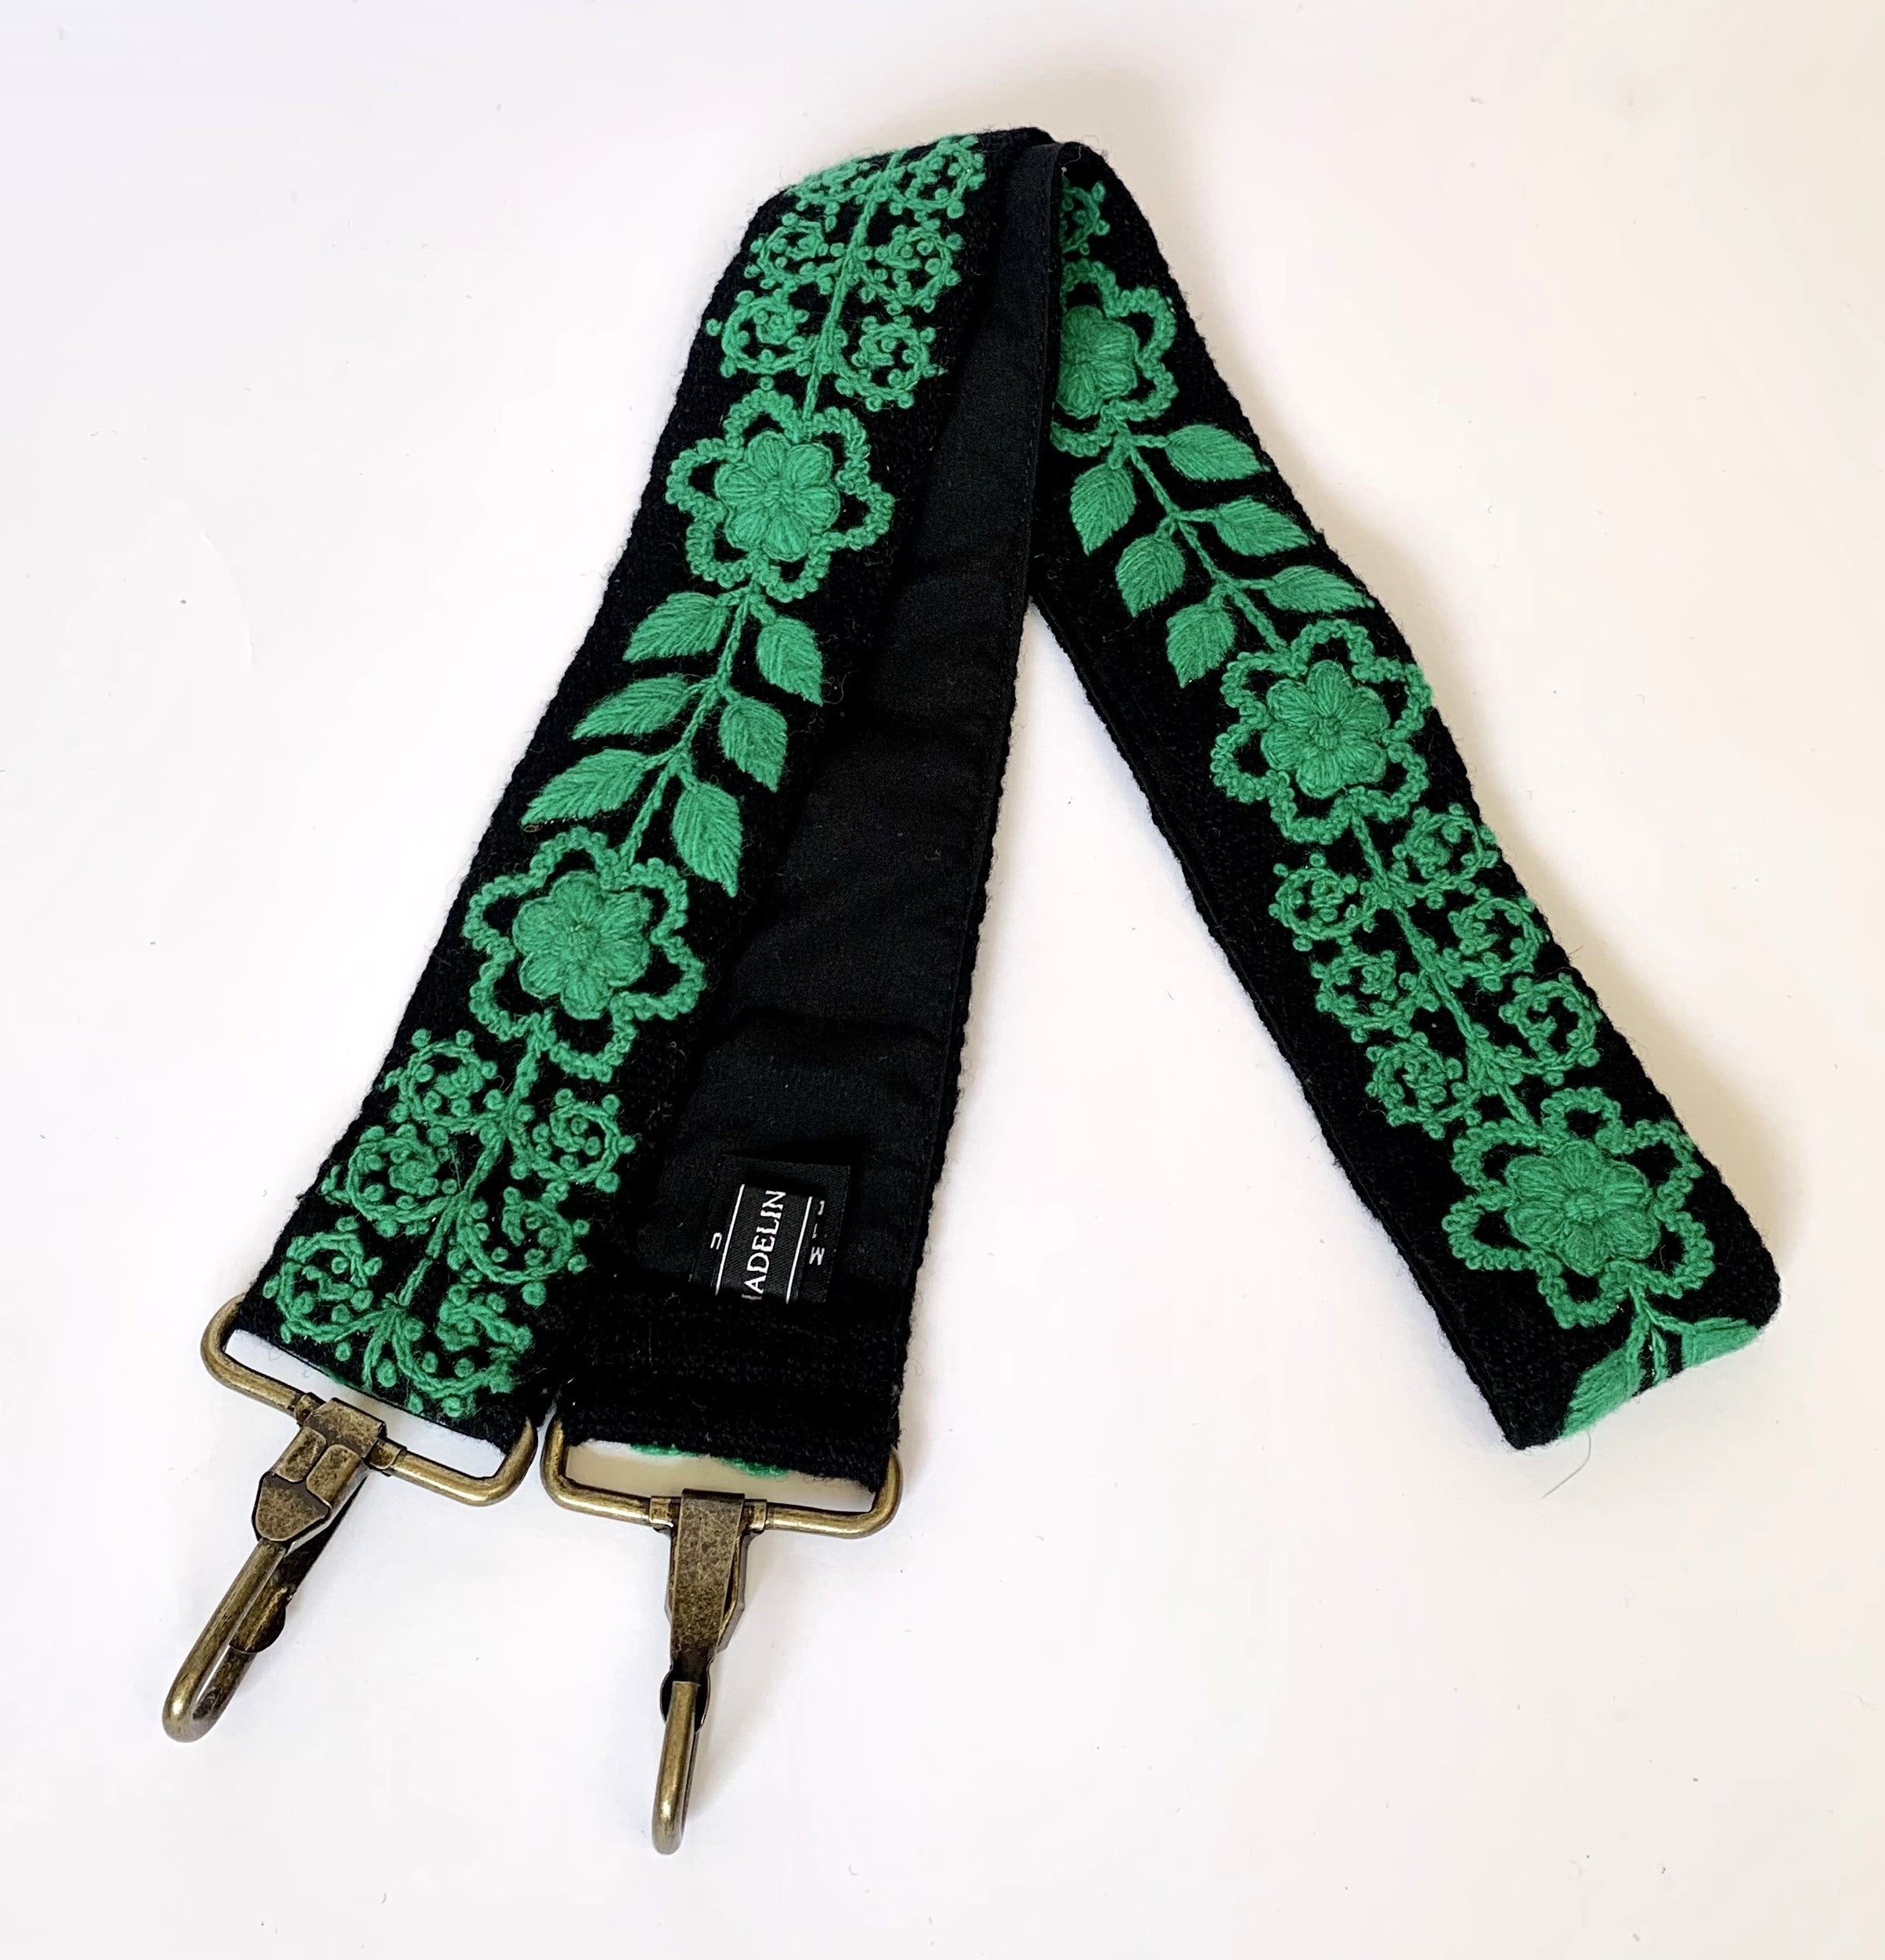 Black and green strap with metal hooks, featuring a floral and leaves design